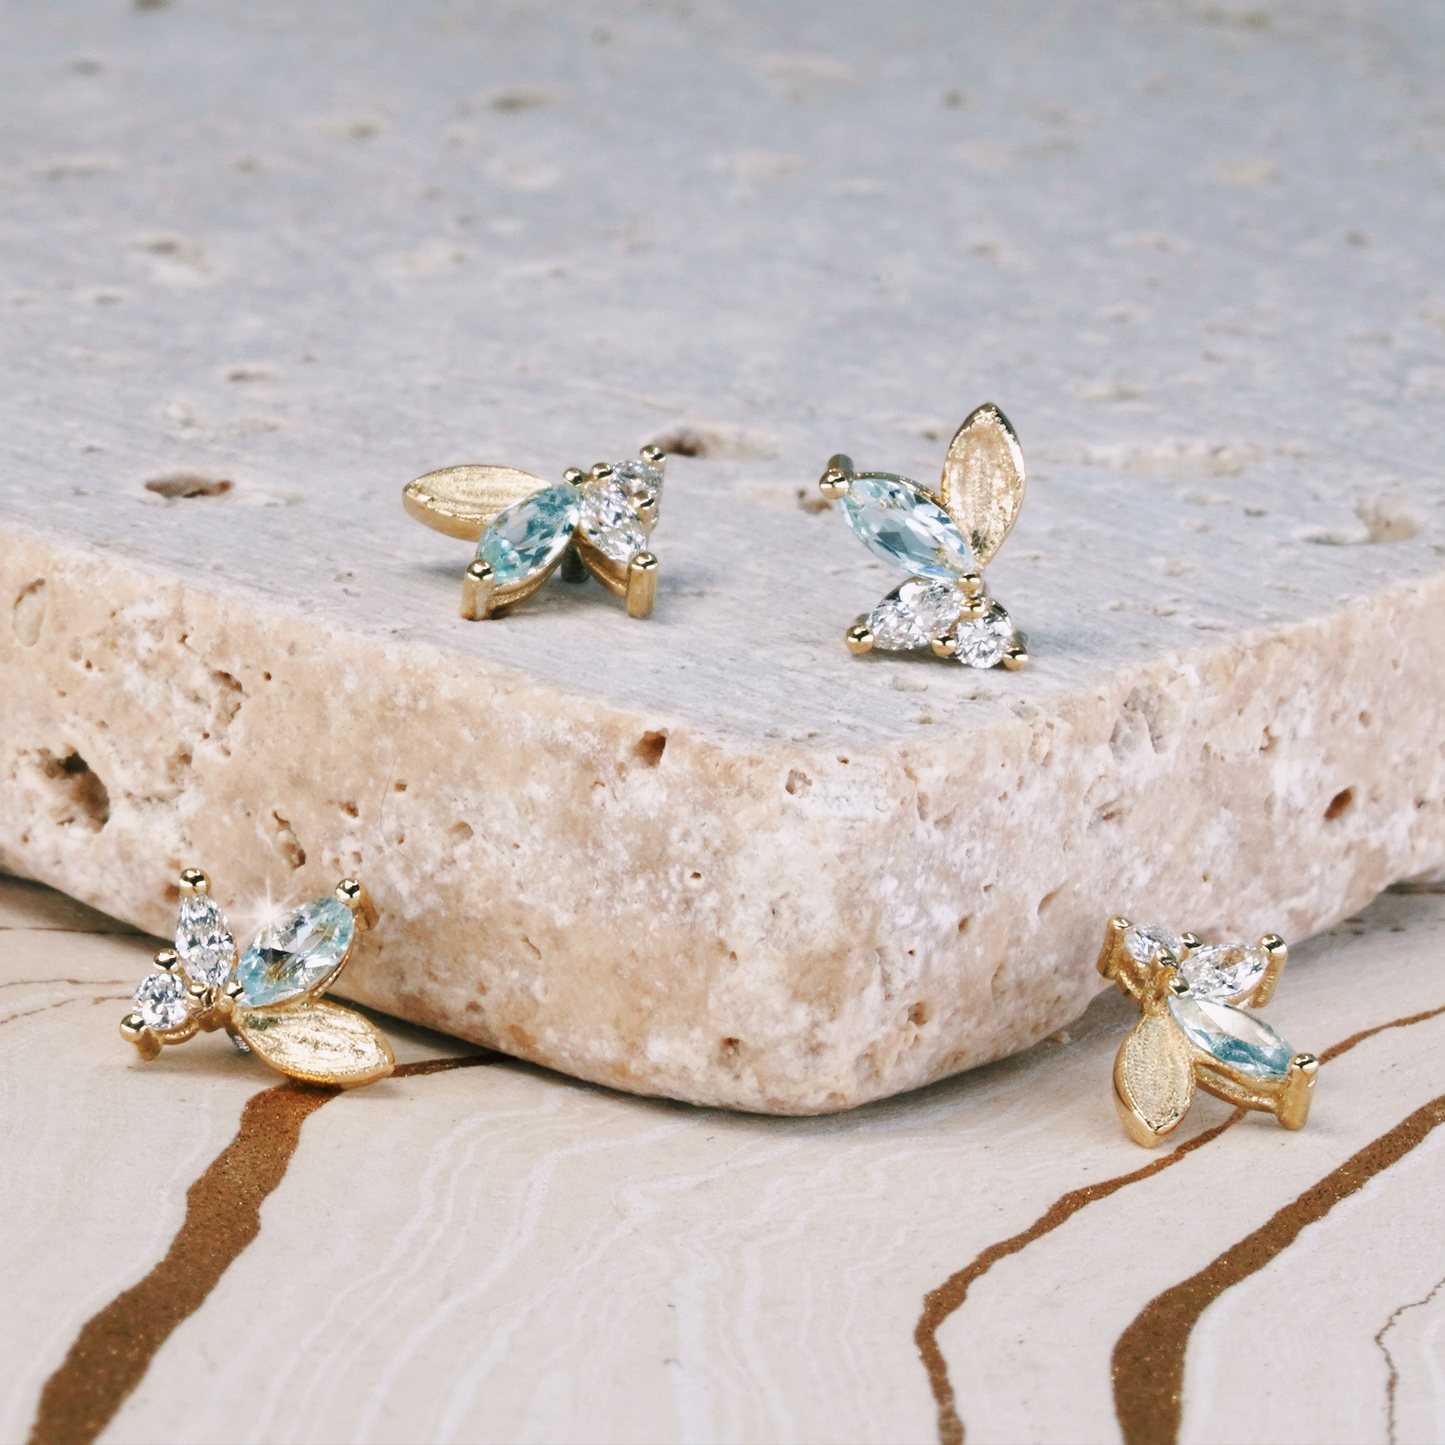 Monet's Lily Petals Threaded End with Diamond and Aquamarine